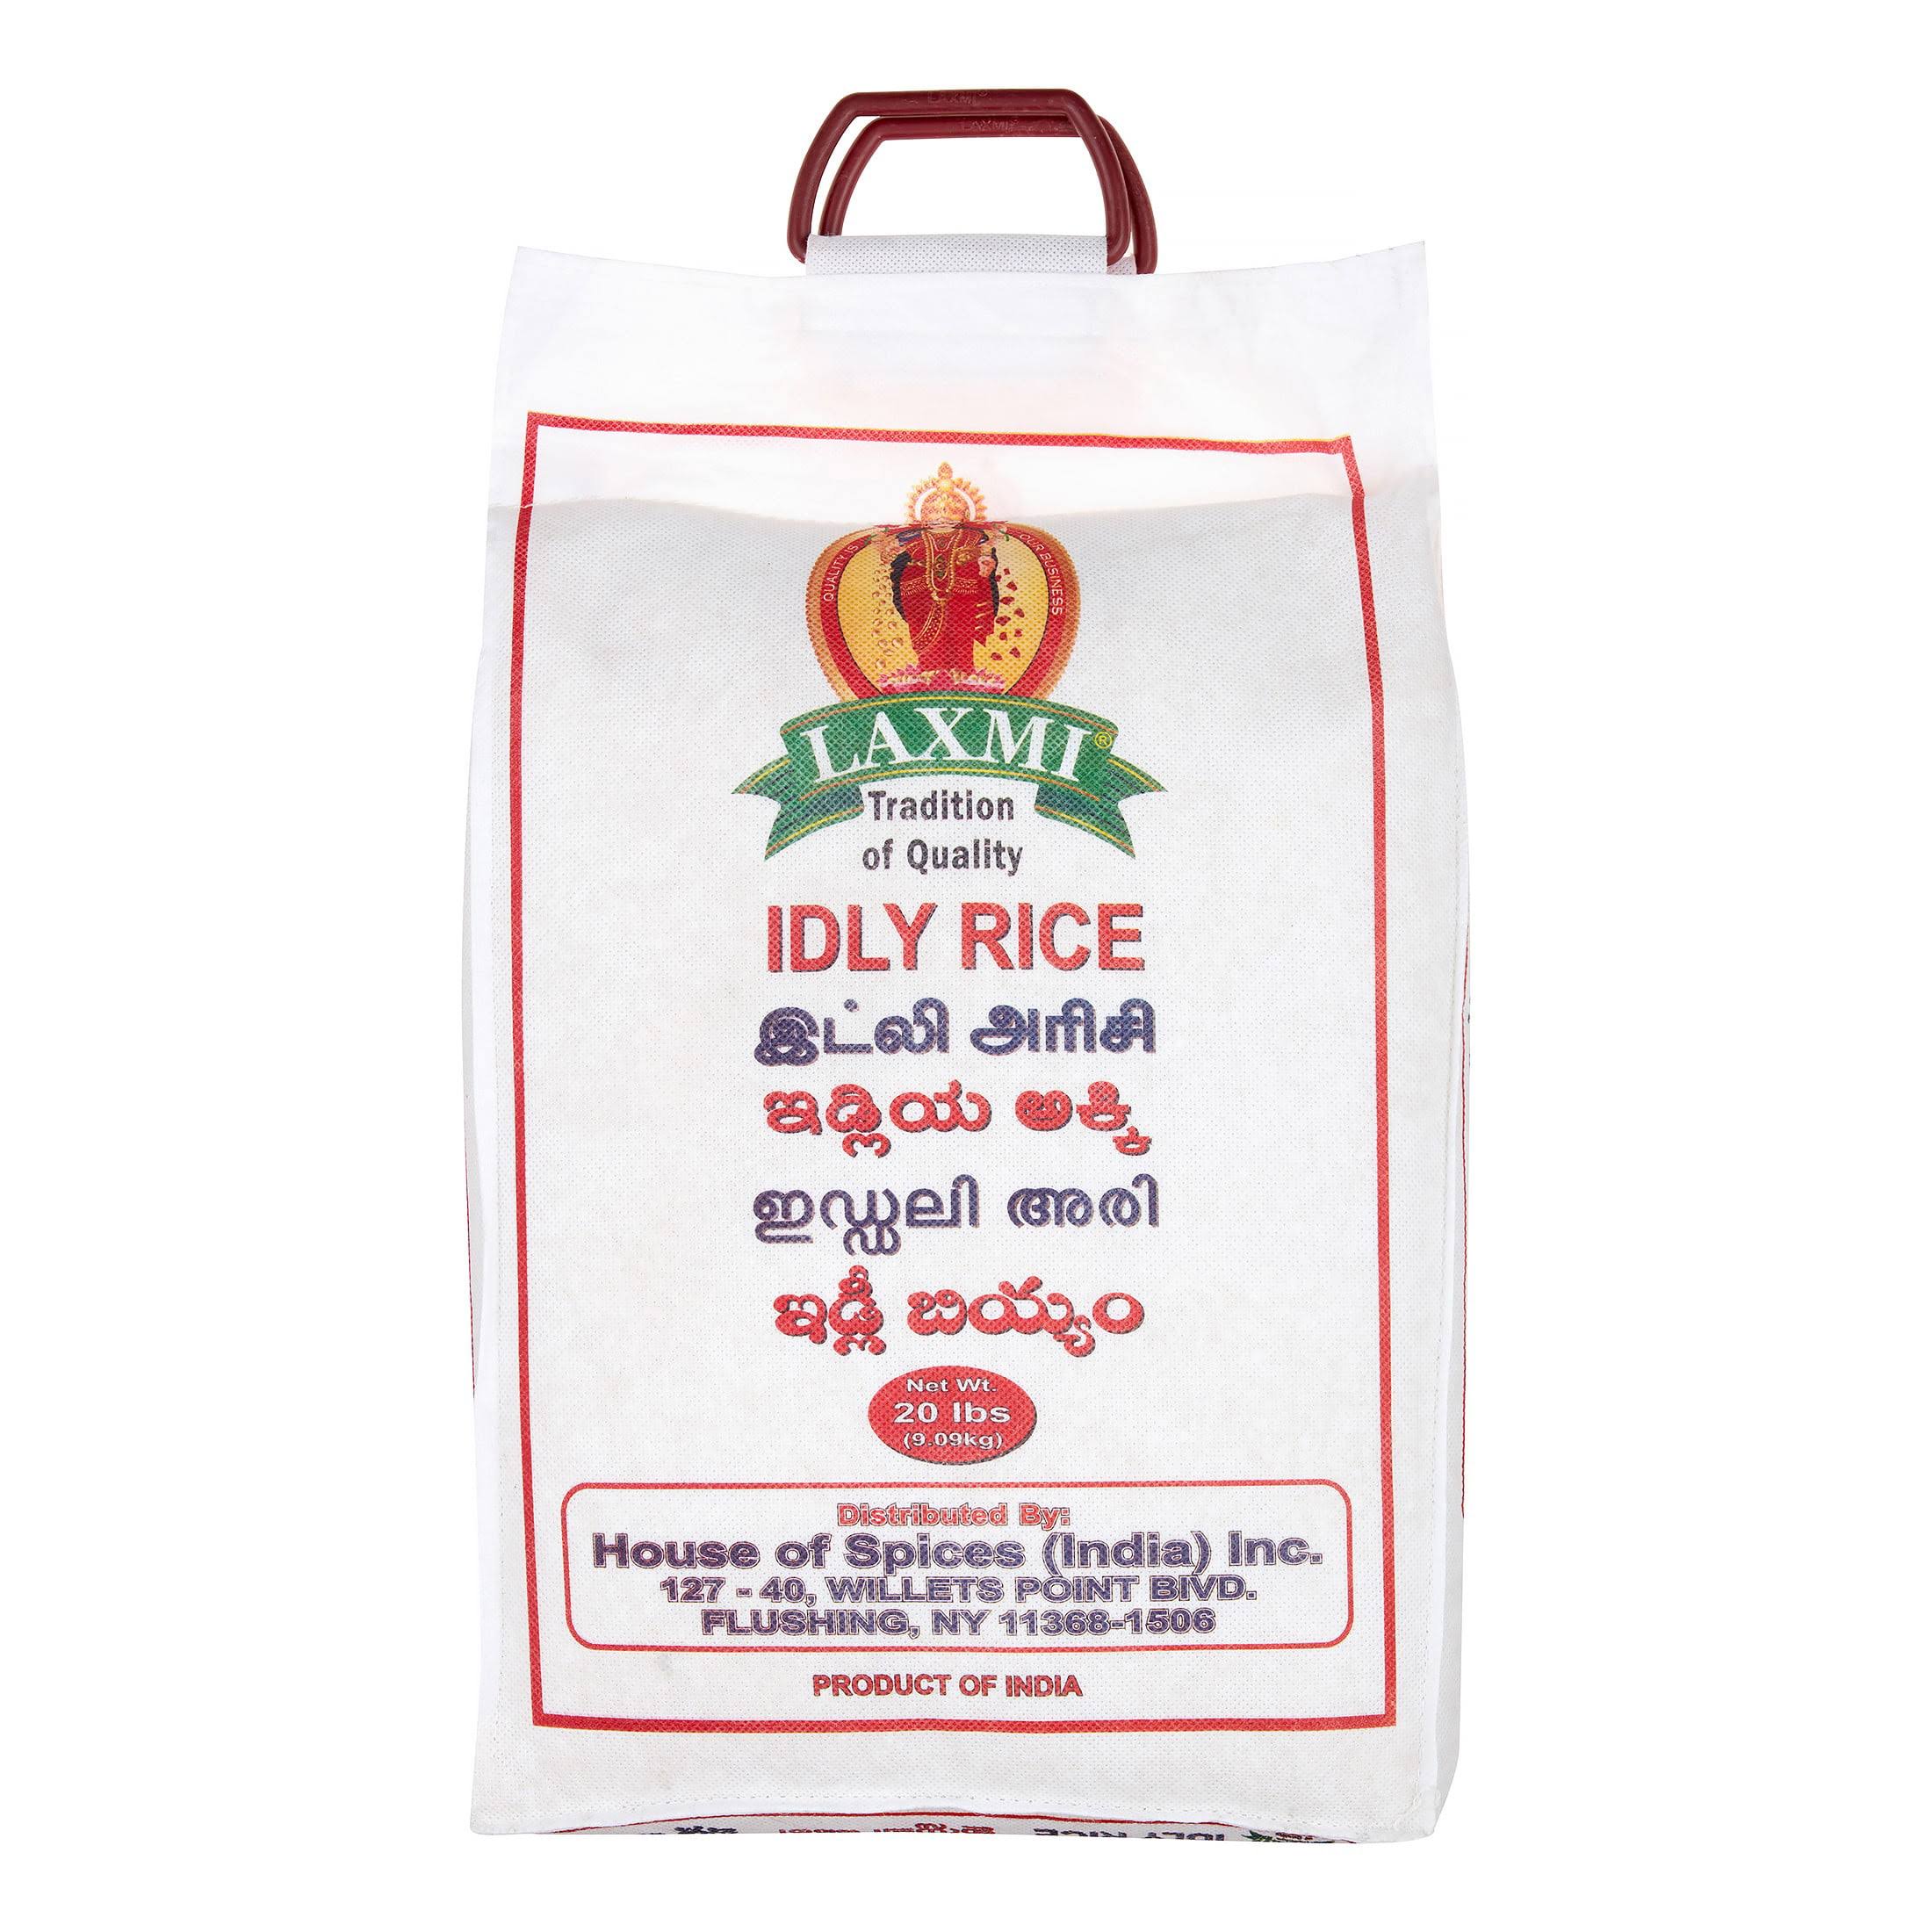 Laxmi Natural Idli Rice - House of Spices, 20 Pounds